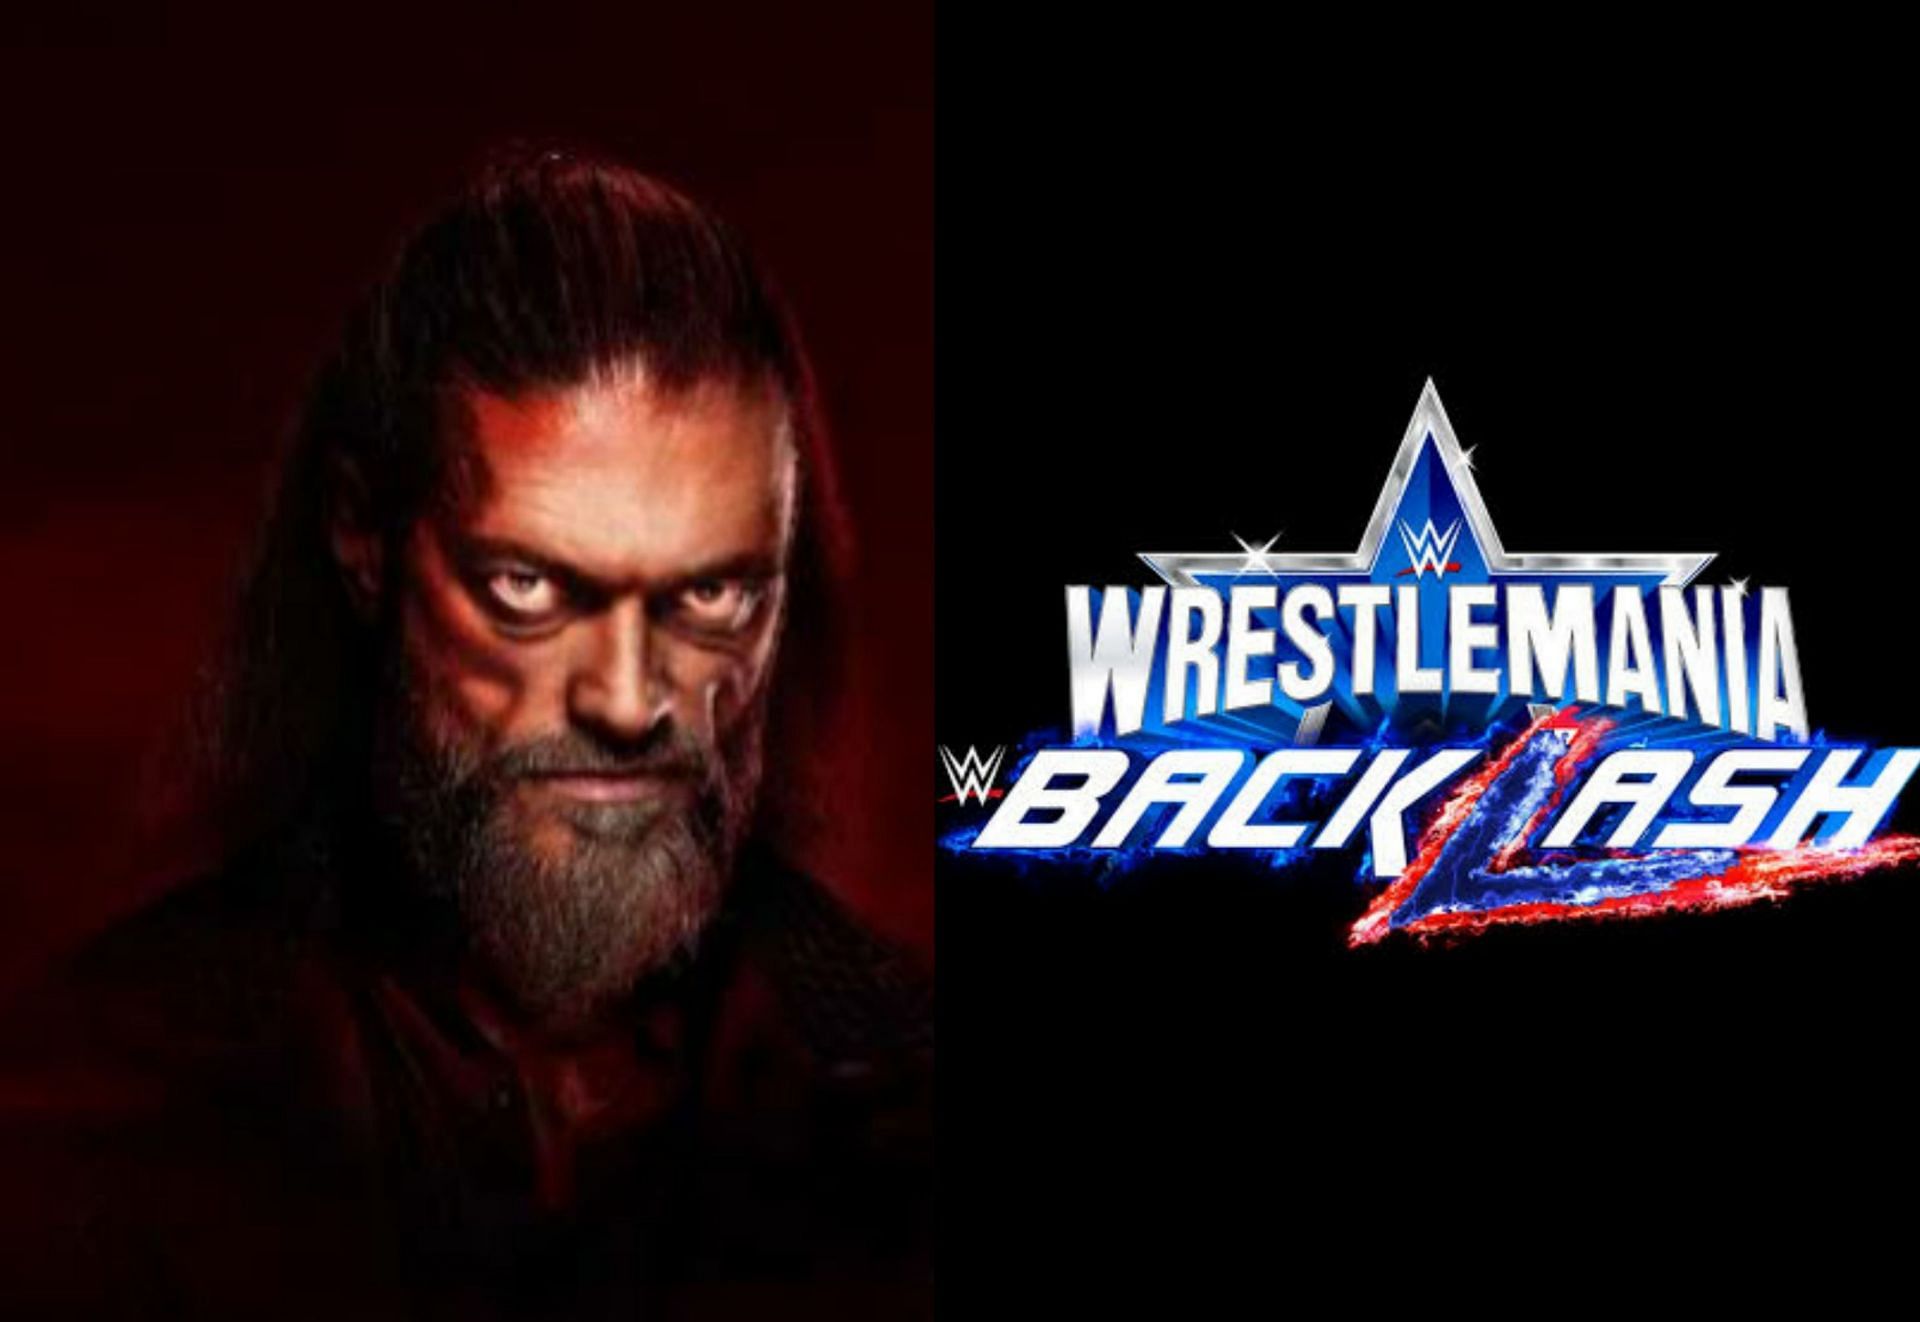 WrestleMania Backlash will be held on May 8, 2022.